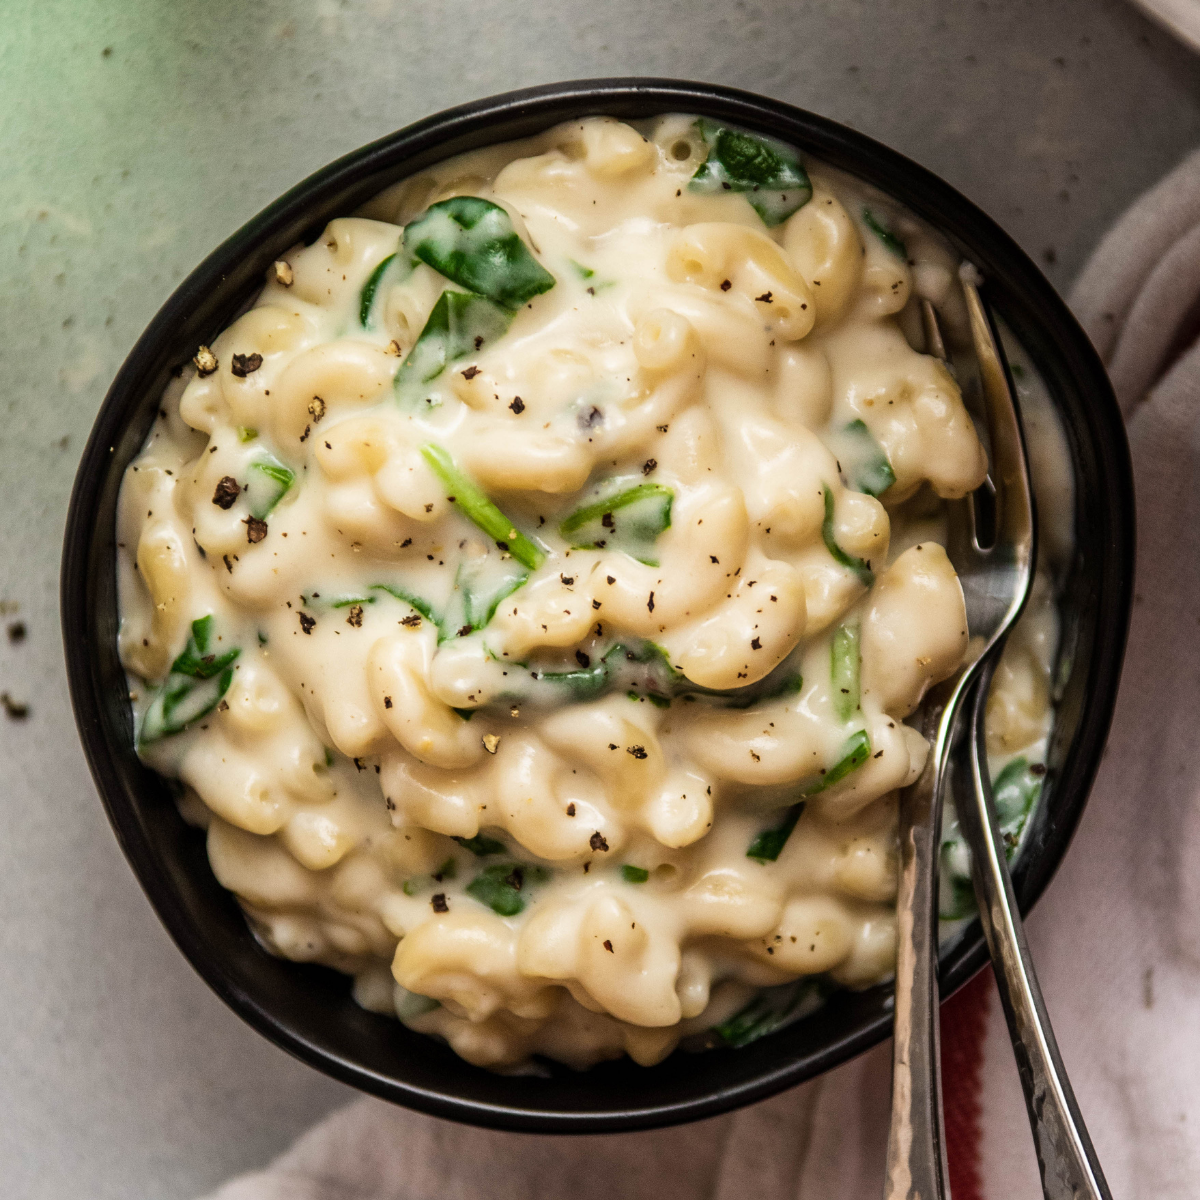 Macaroni with white sauce and spinach in a black ceramic bowl.